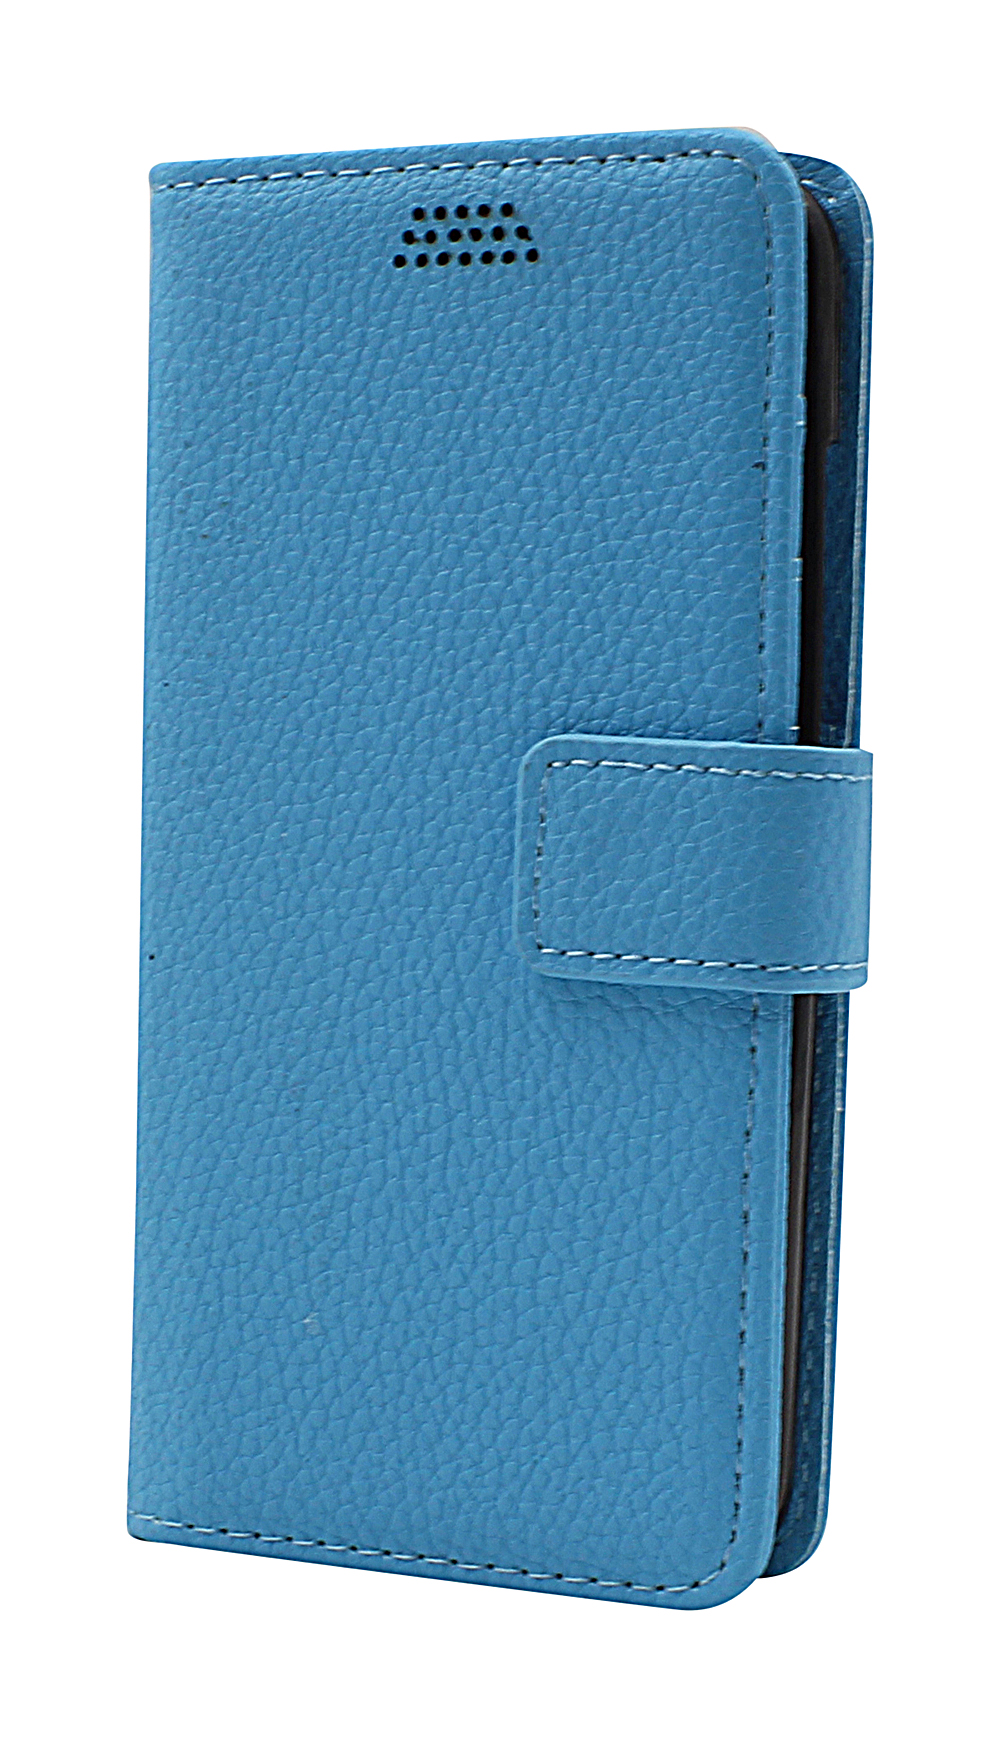 New Standcase Wallet Huawei Y6 Pro (TIT-L01)